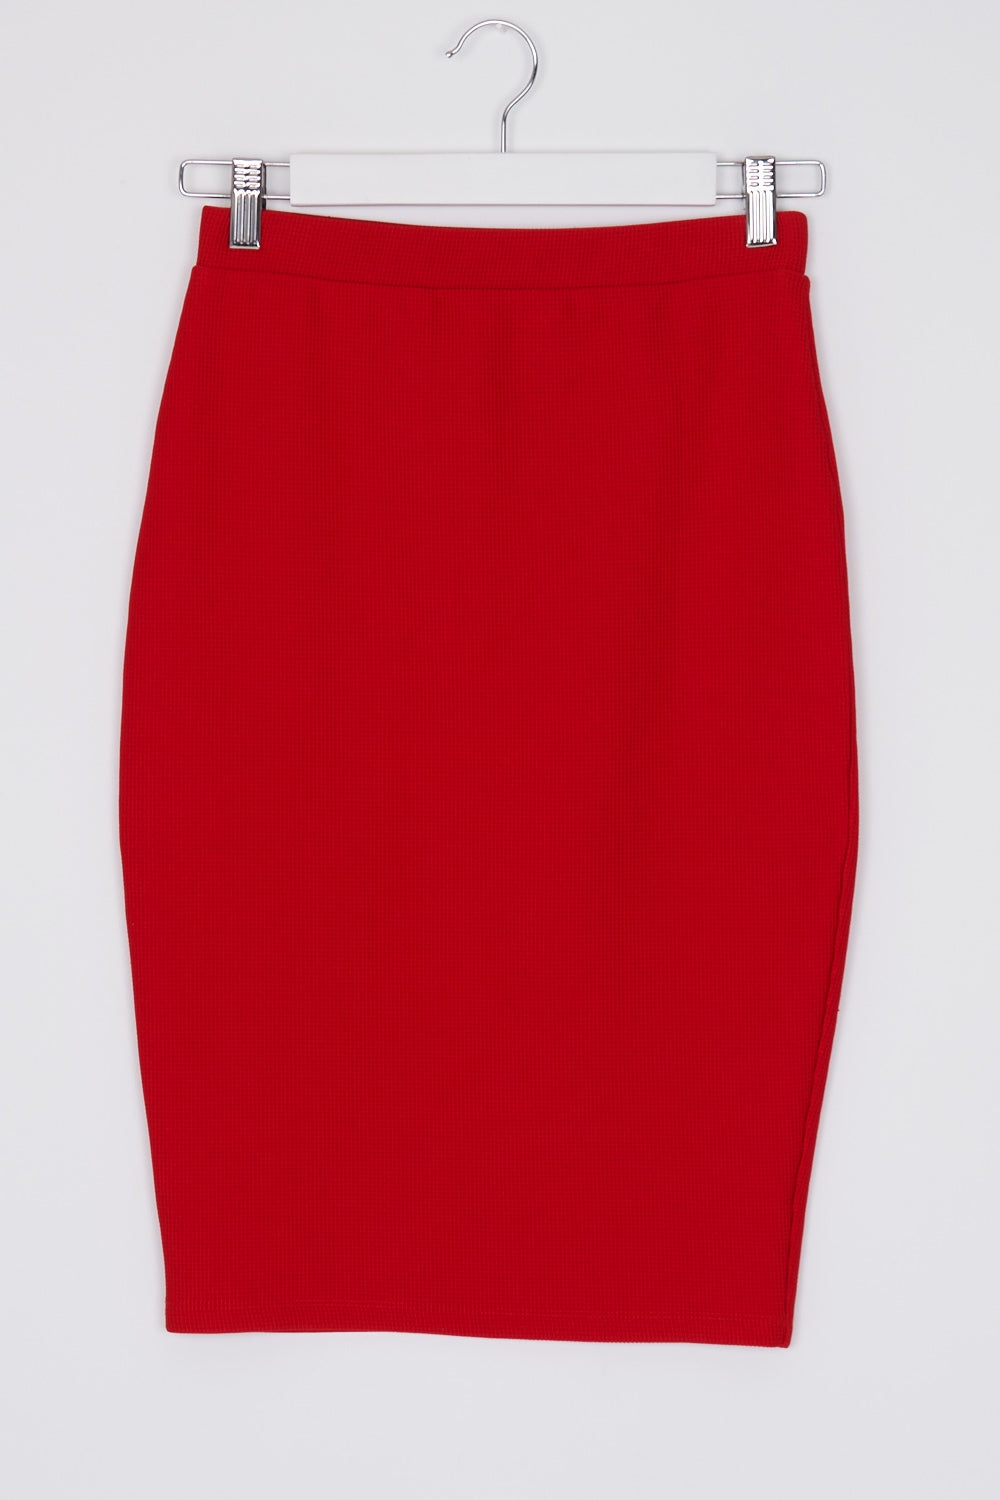 Atmos &amp; Here Red Pencil Skirt 8